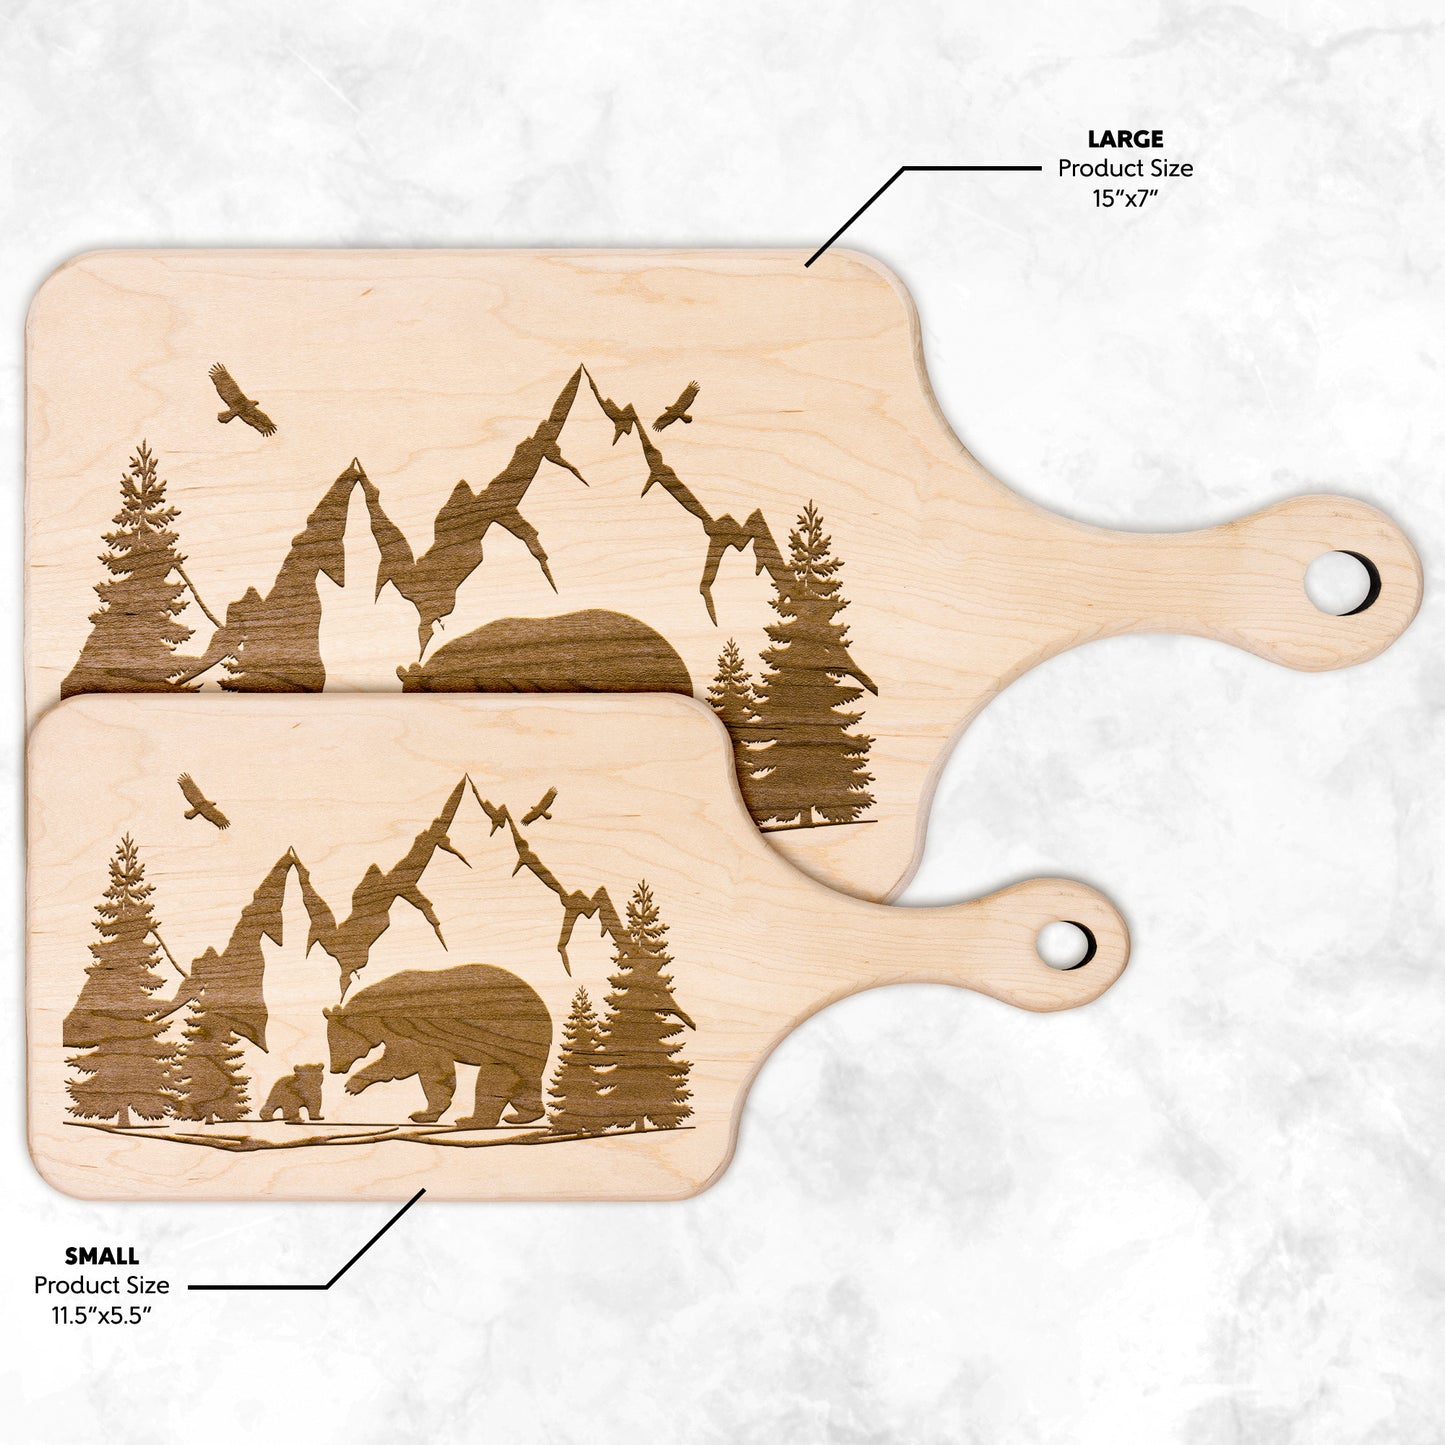 Black Bear Maple & Walnut Hardwood Cutting Boards: Nature's Artistry for Your Culinary Creations